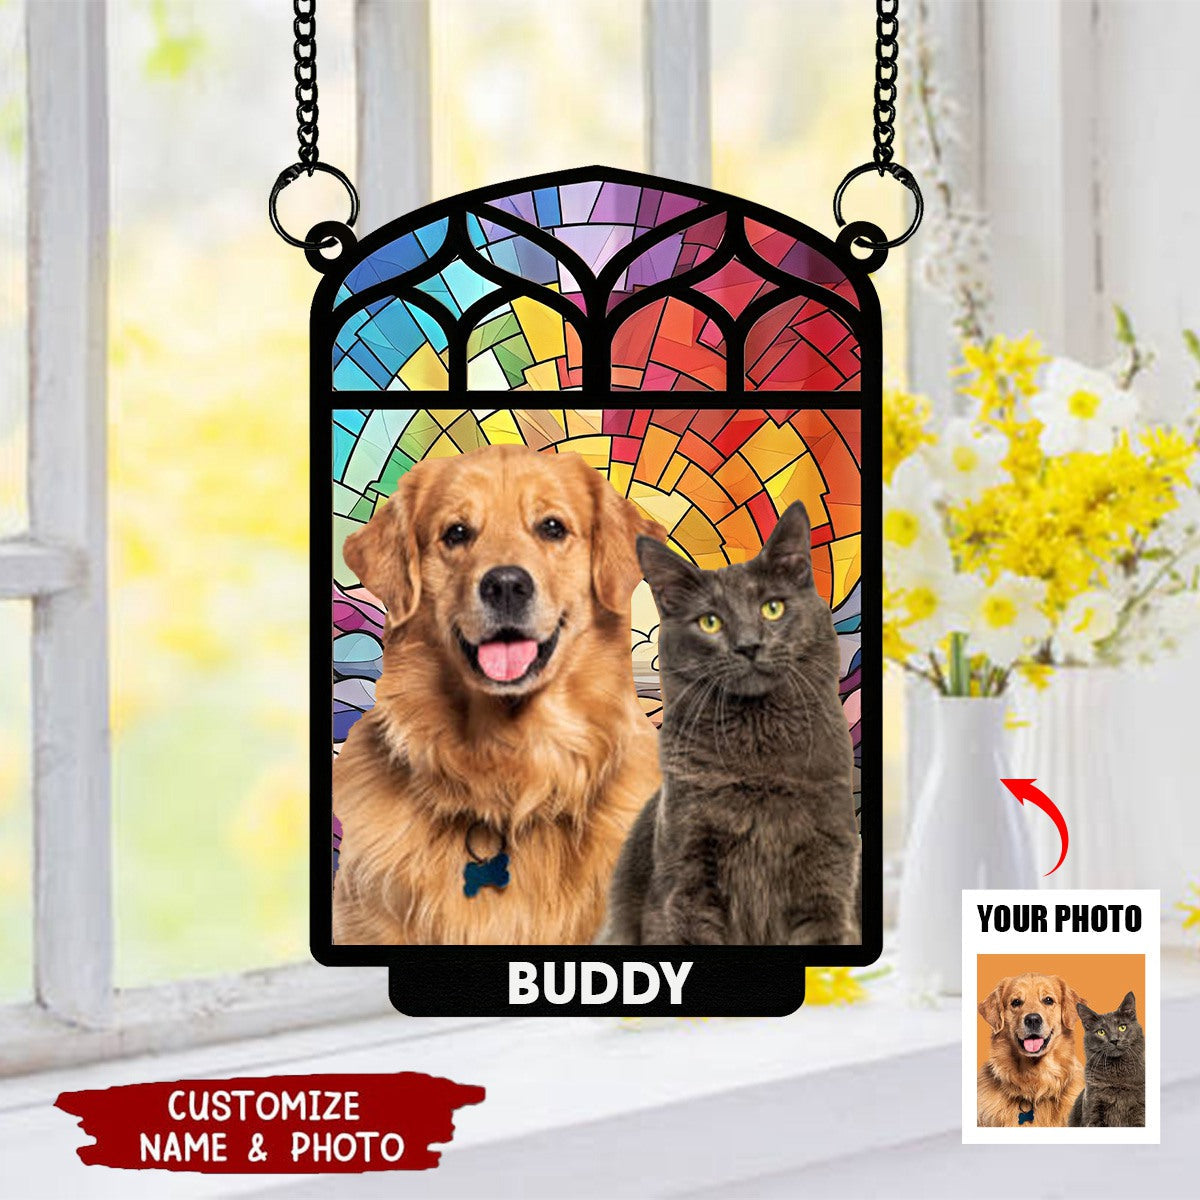 Always Be In Our Hearts - Personalized Window Hanging Suncatcher Ornament